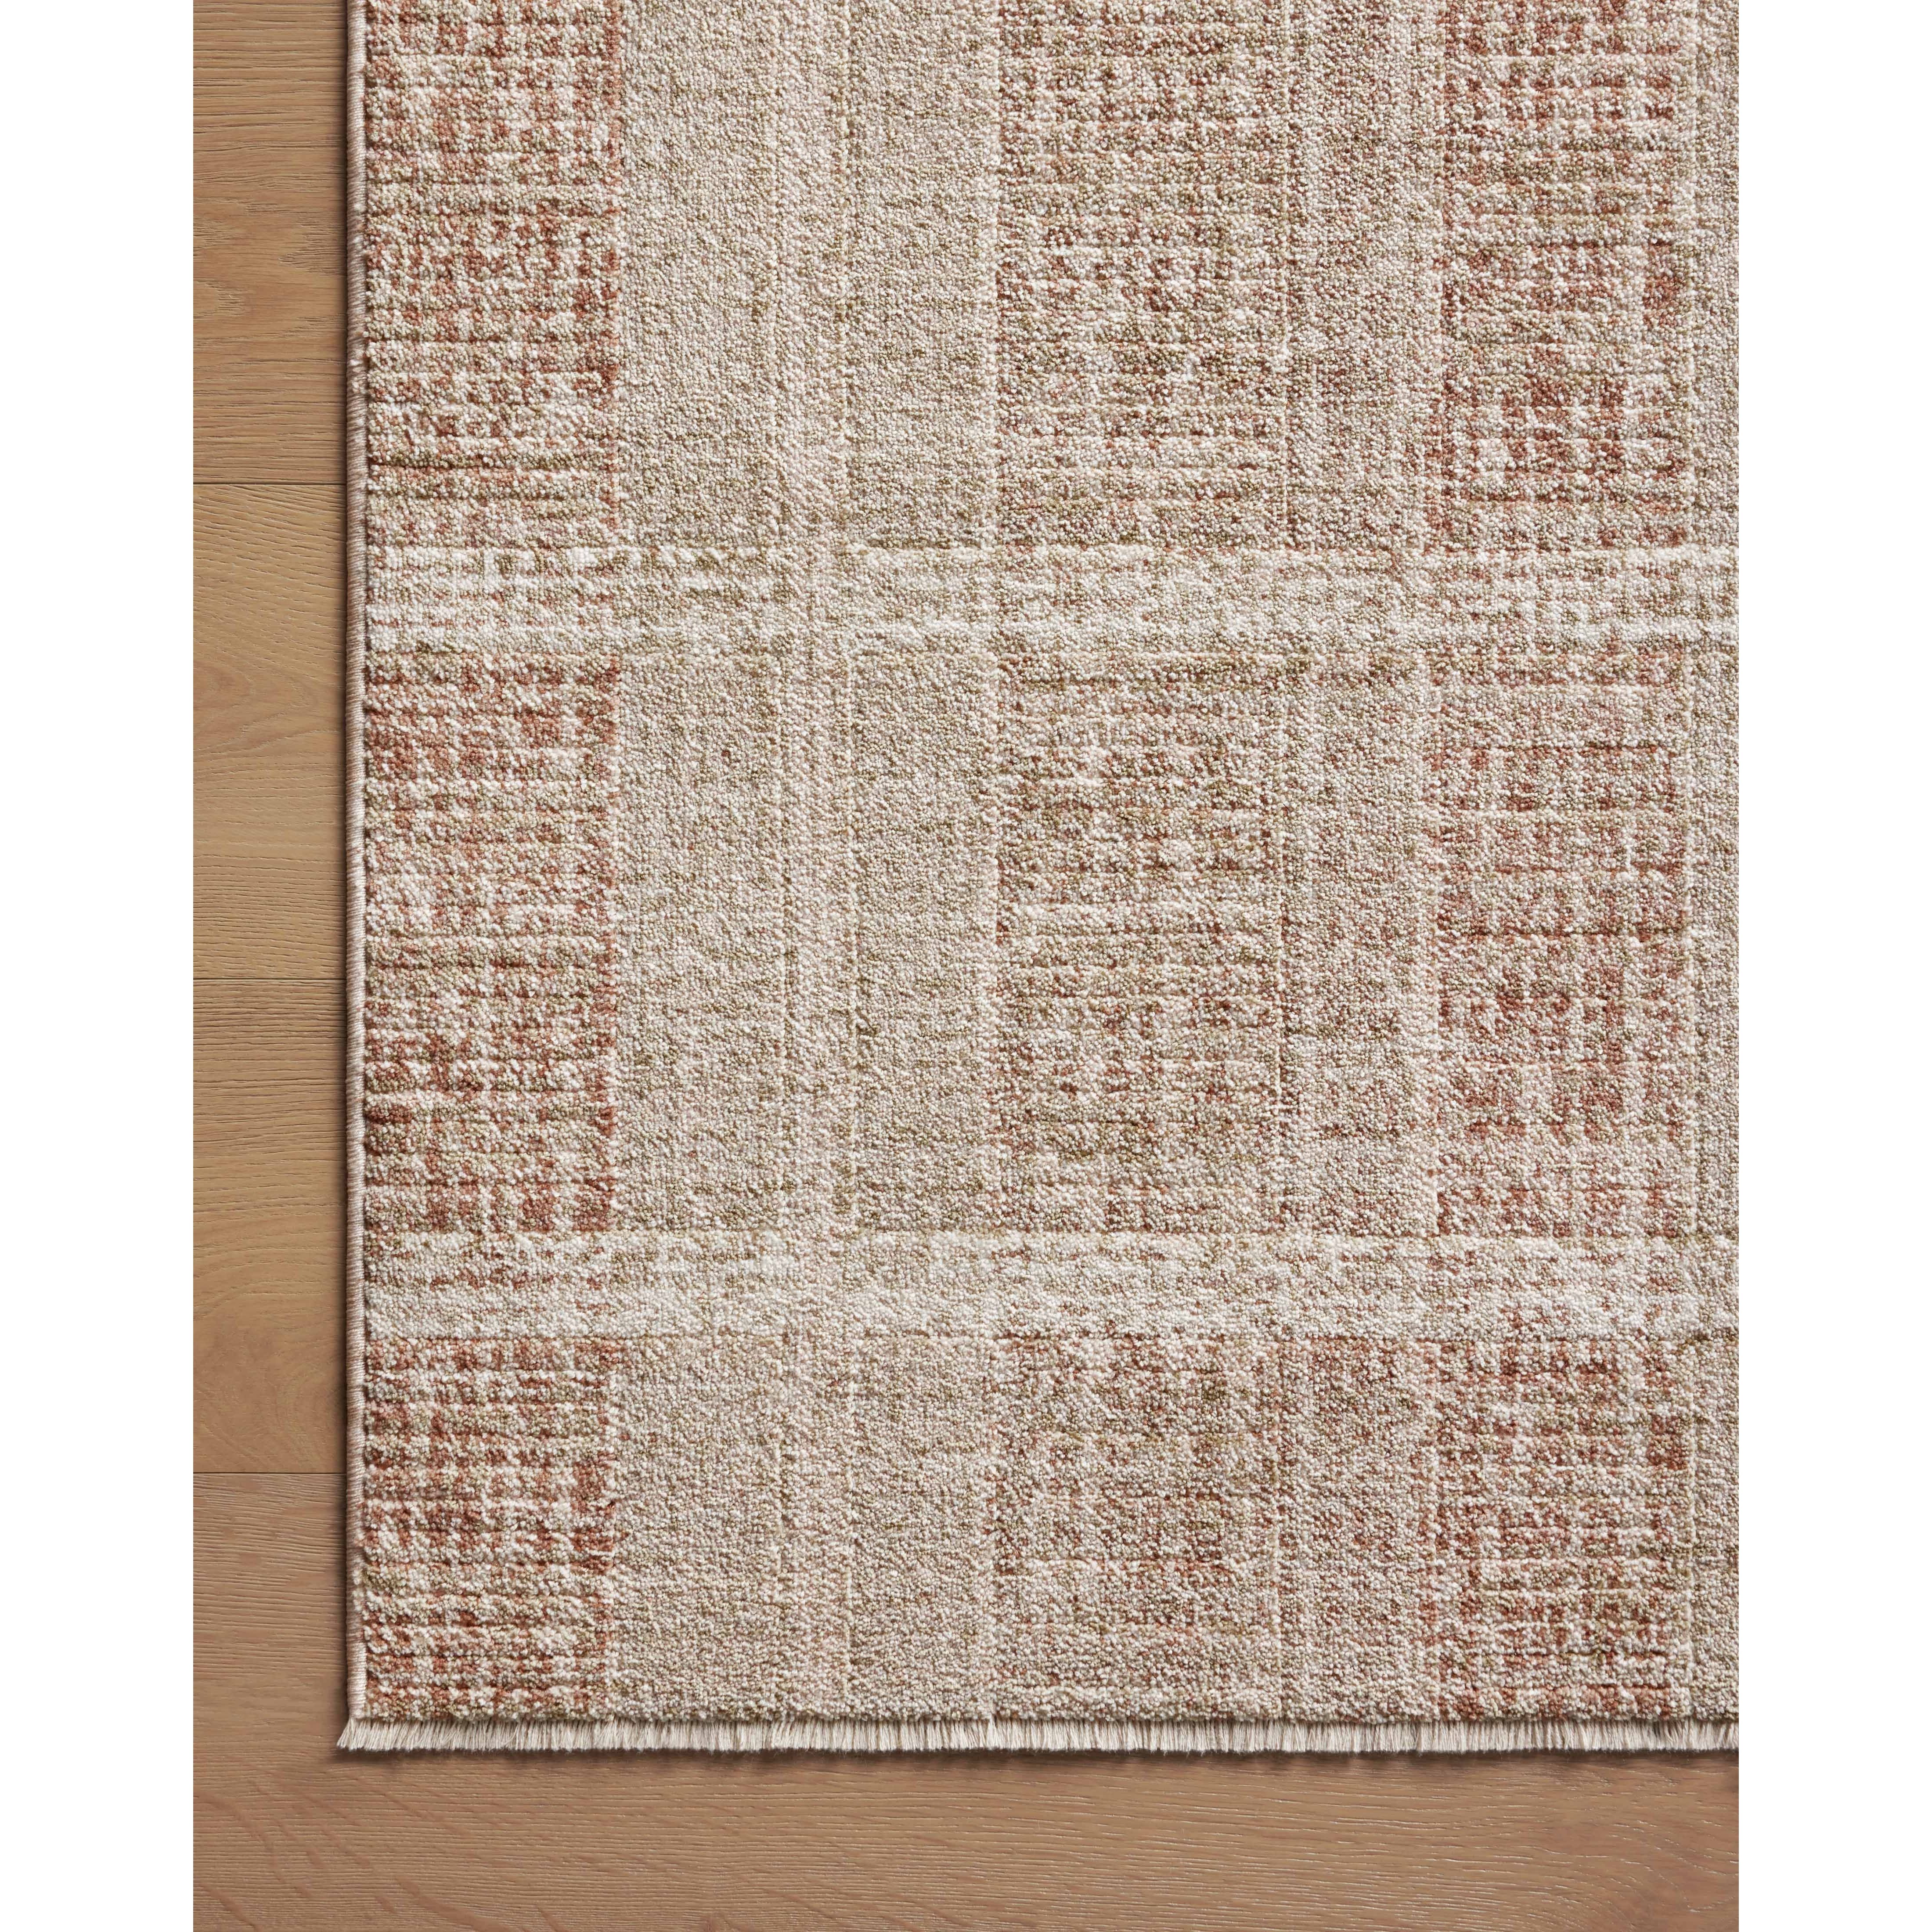 The Ember Collection by Angela Rose x Loloi is a modern flatweave area rug with a timeless plaid pattern that adds depth and coziness to any living room, bedroom, dining room, or hallway. Ember is power-loomed of 100% space-dyed polyester, a durable construction that creates a nuanced depth of color, available in a range of neutral palettes. Amethyst Home provides interior design, new home construction design consulting, vintage area rugs, and lighting in the San Diego metro area.